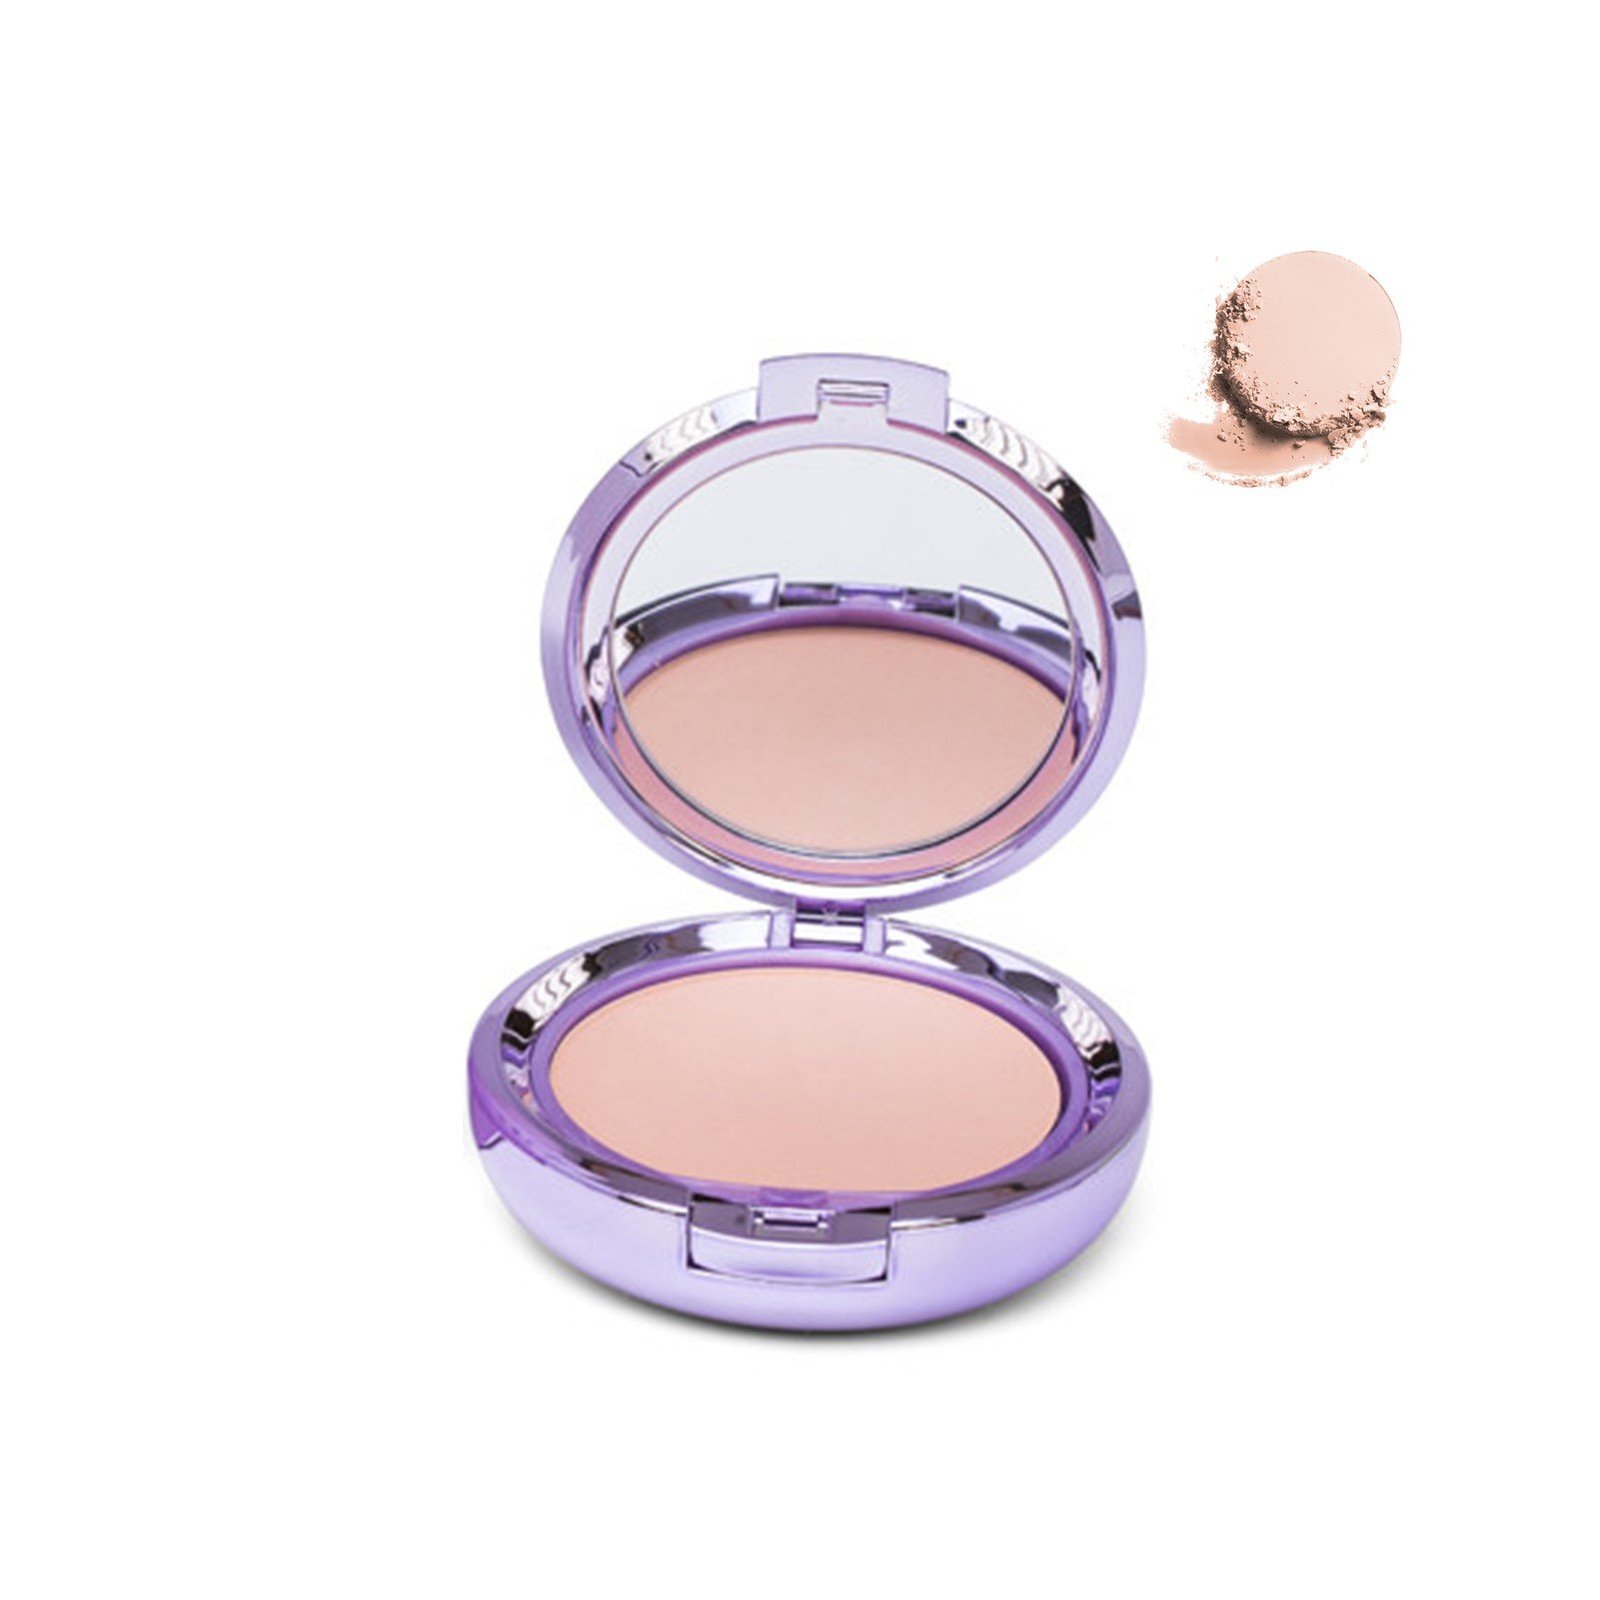 Covermark Compact Powder Oily-Acneic Skin 2 10g (0.35 oz)